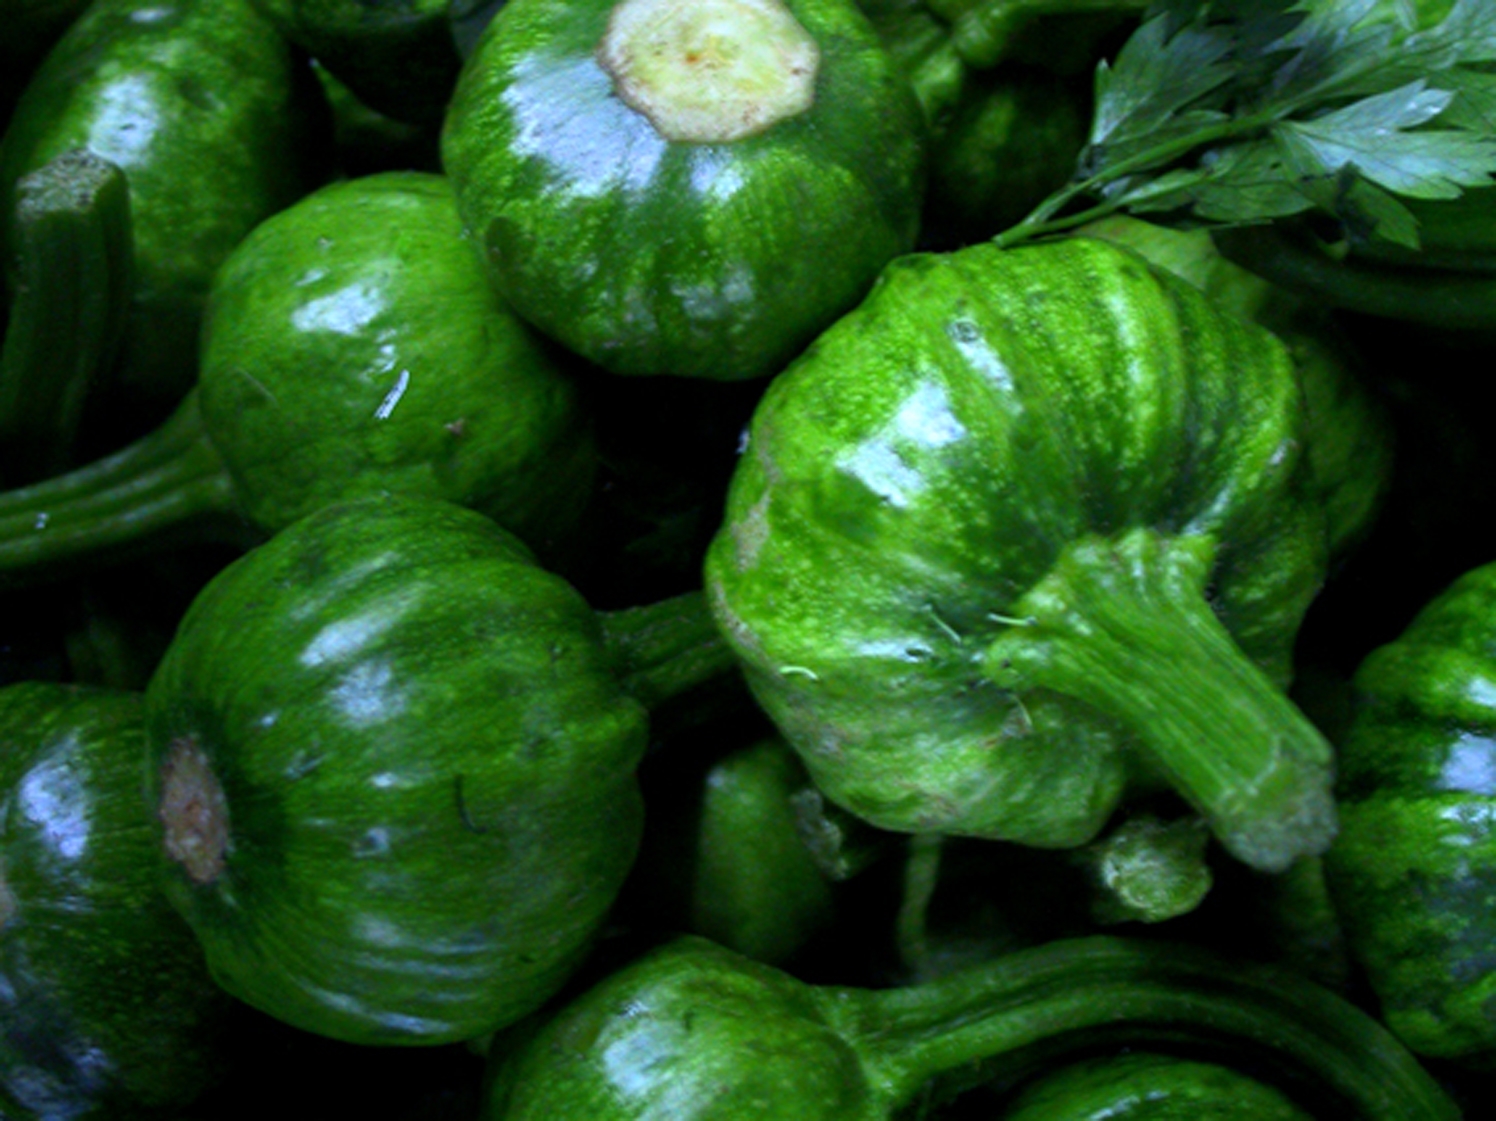 courgettes.jpg